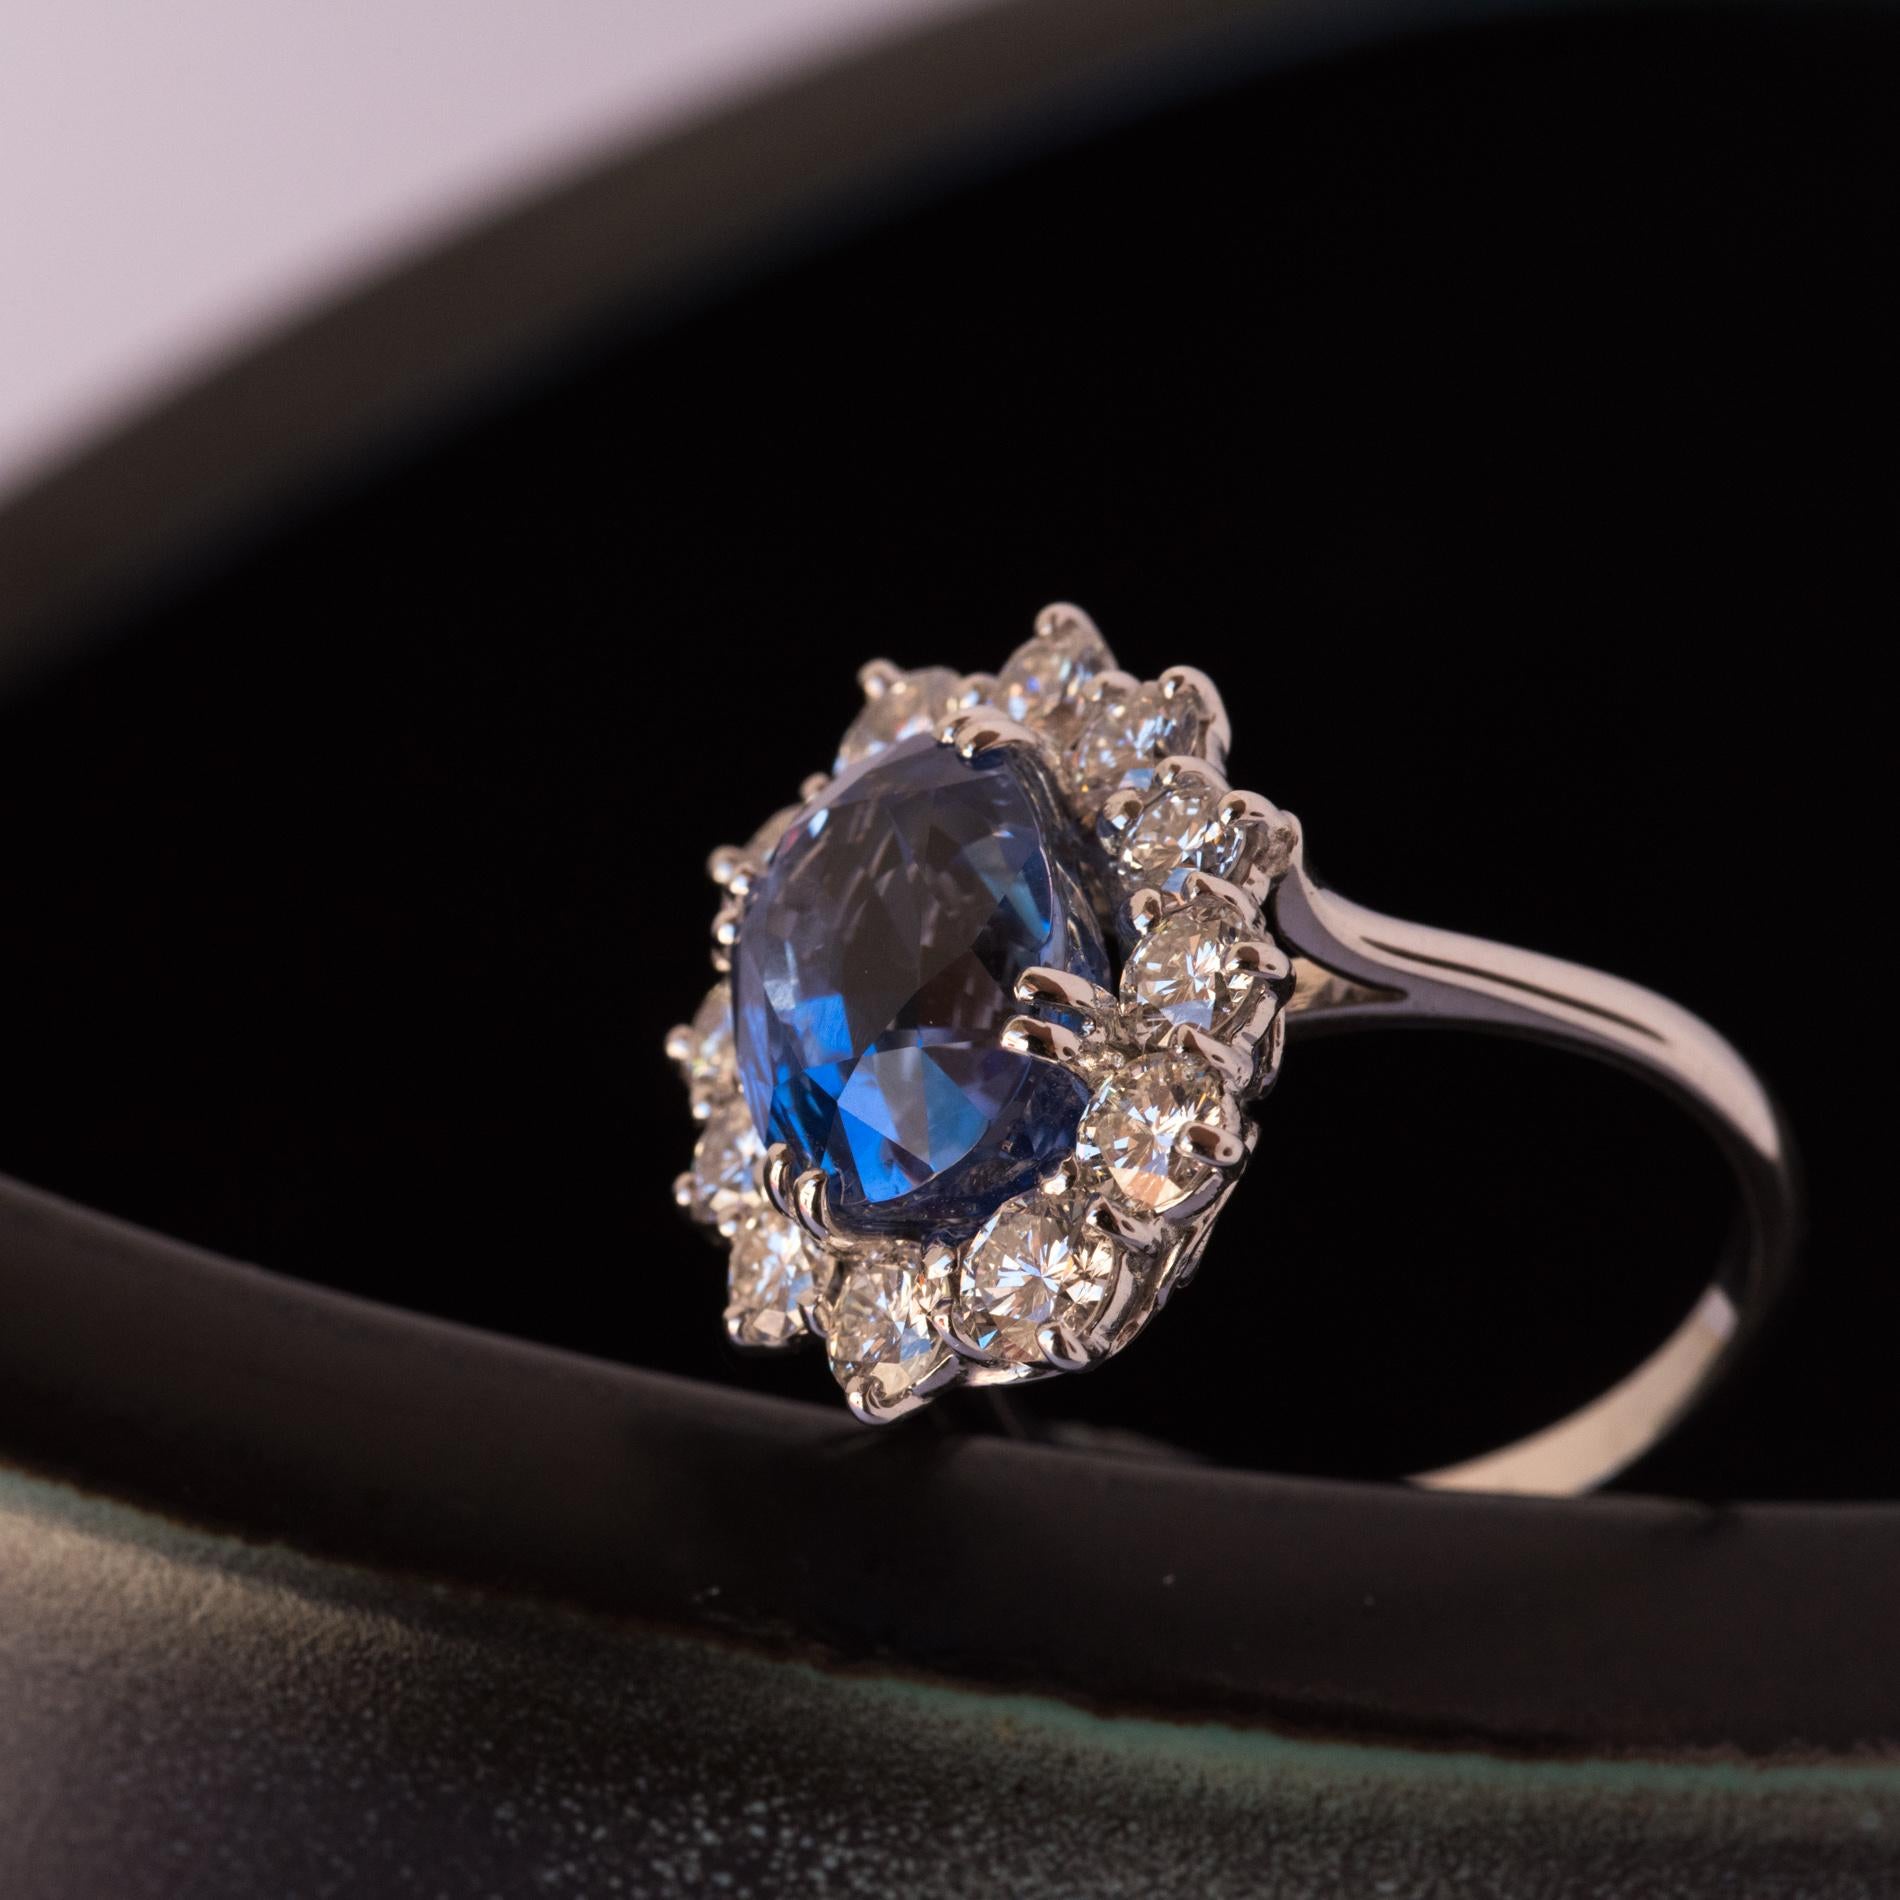 French 1960s No Heat 7.42 Carat Ceylon Sapphire Diamond White Gold Cluster Ring For Sale 6